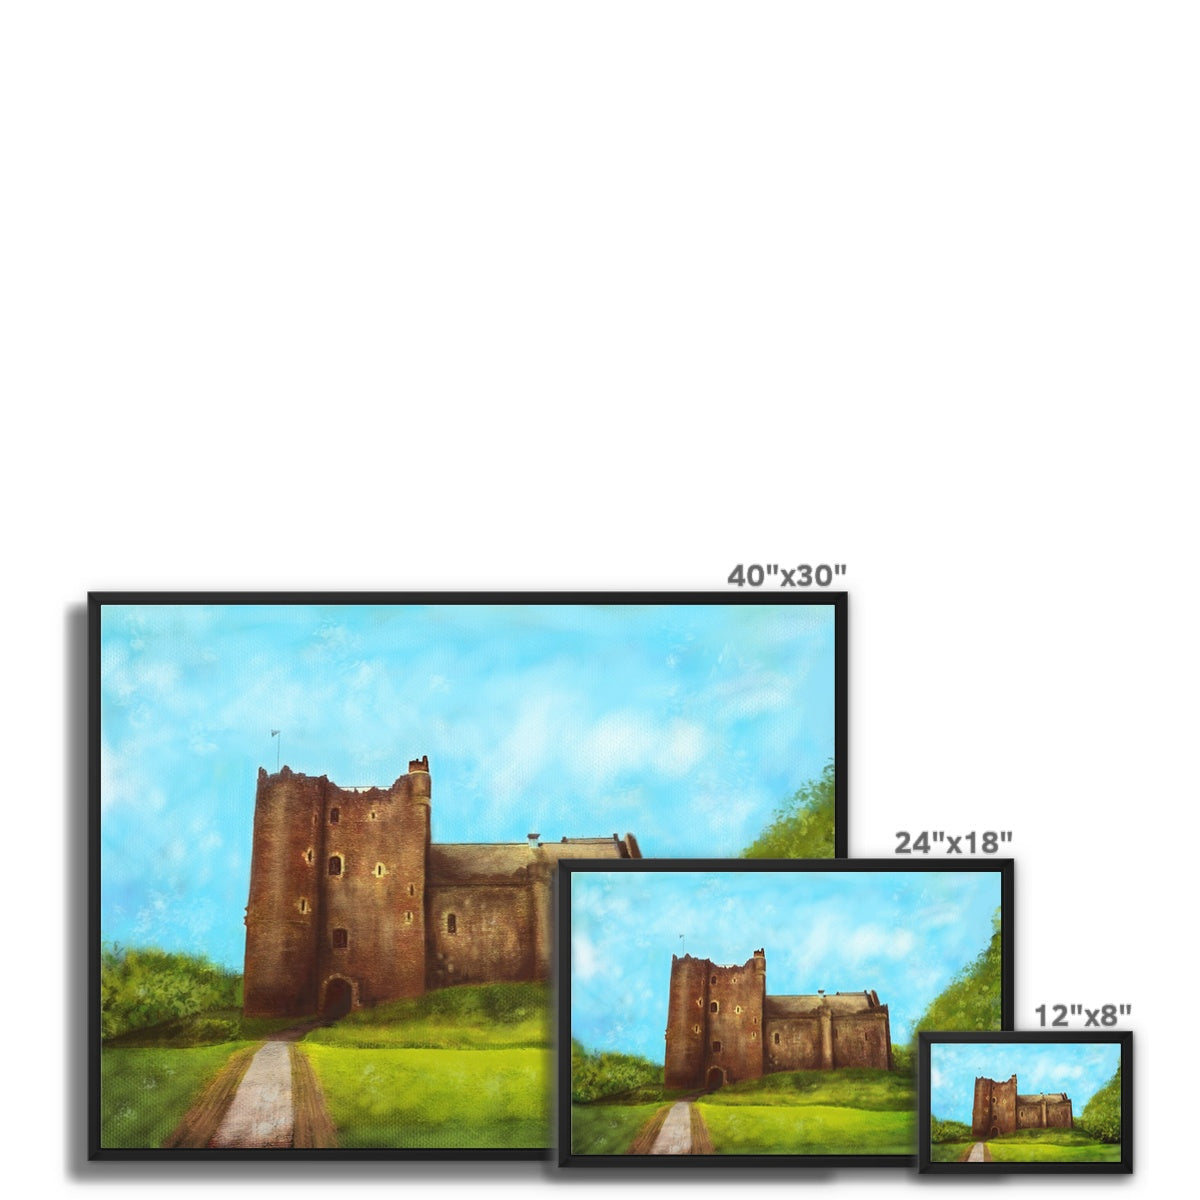 Doune Castle Painting | Framed Canvas From Scotland-Floating Framed Canvas Prints-Historic & Iconic Scotland Art Gallery-Paintings, Prints, Homeware, Art Gifts From Scotland By Scottish Artist Kevin Hunter